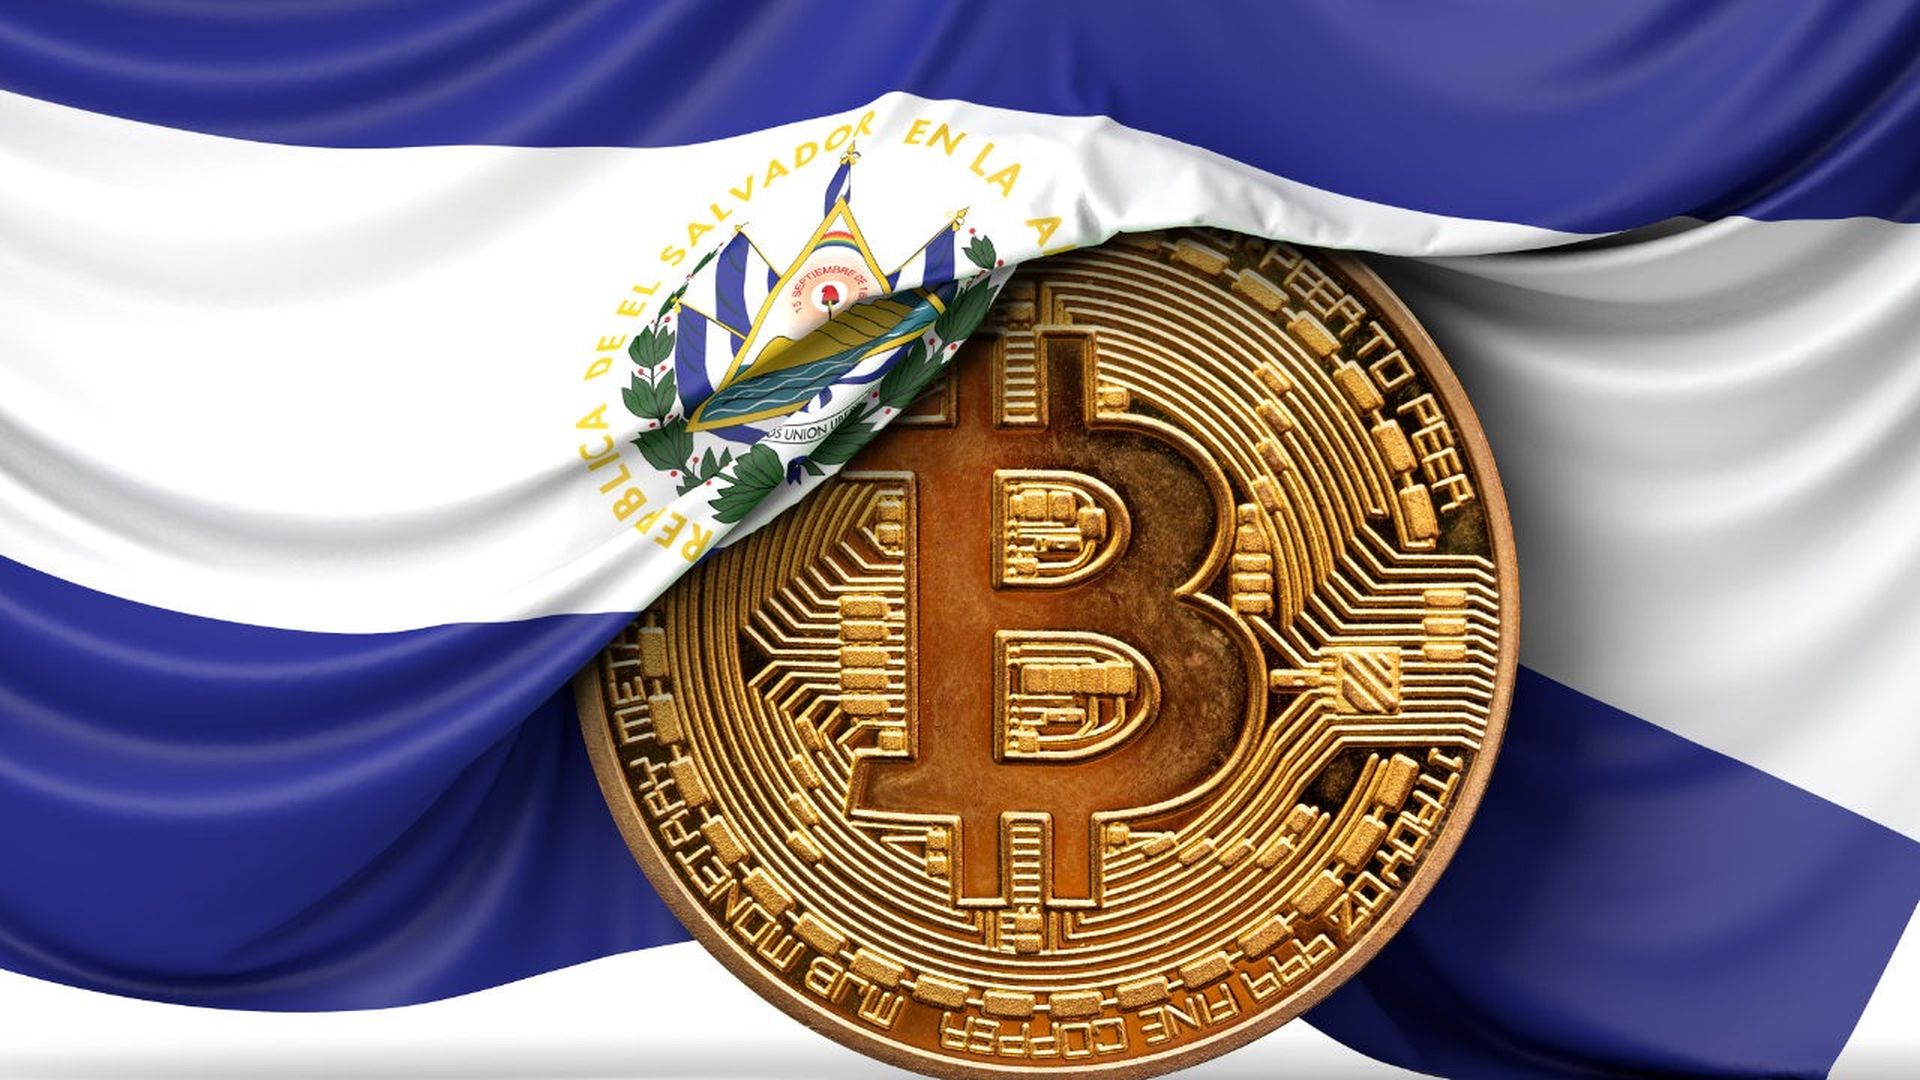 Today we've learned that El Salvador bought bitcoin again